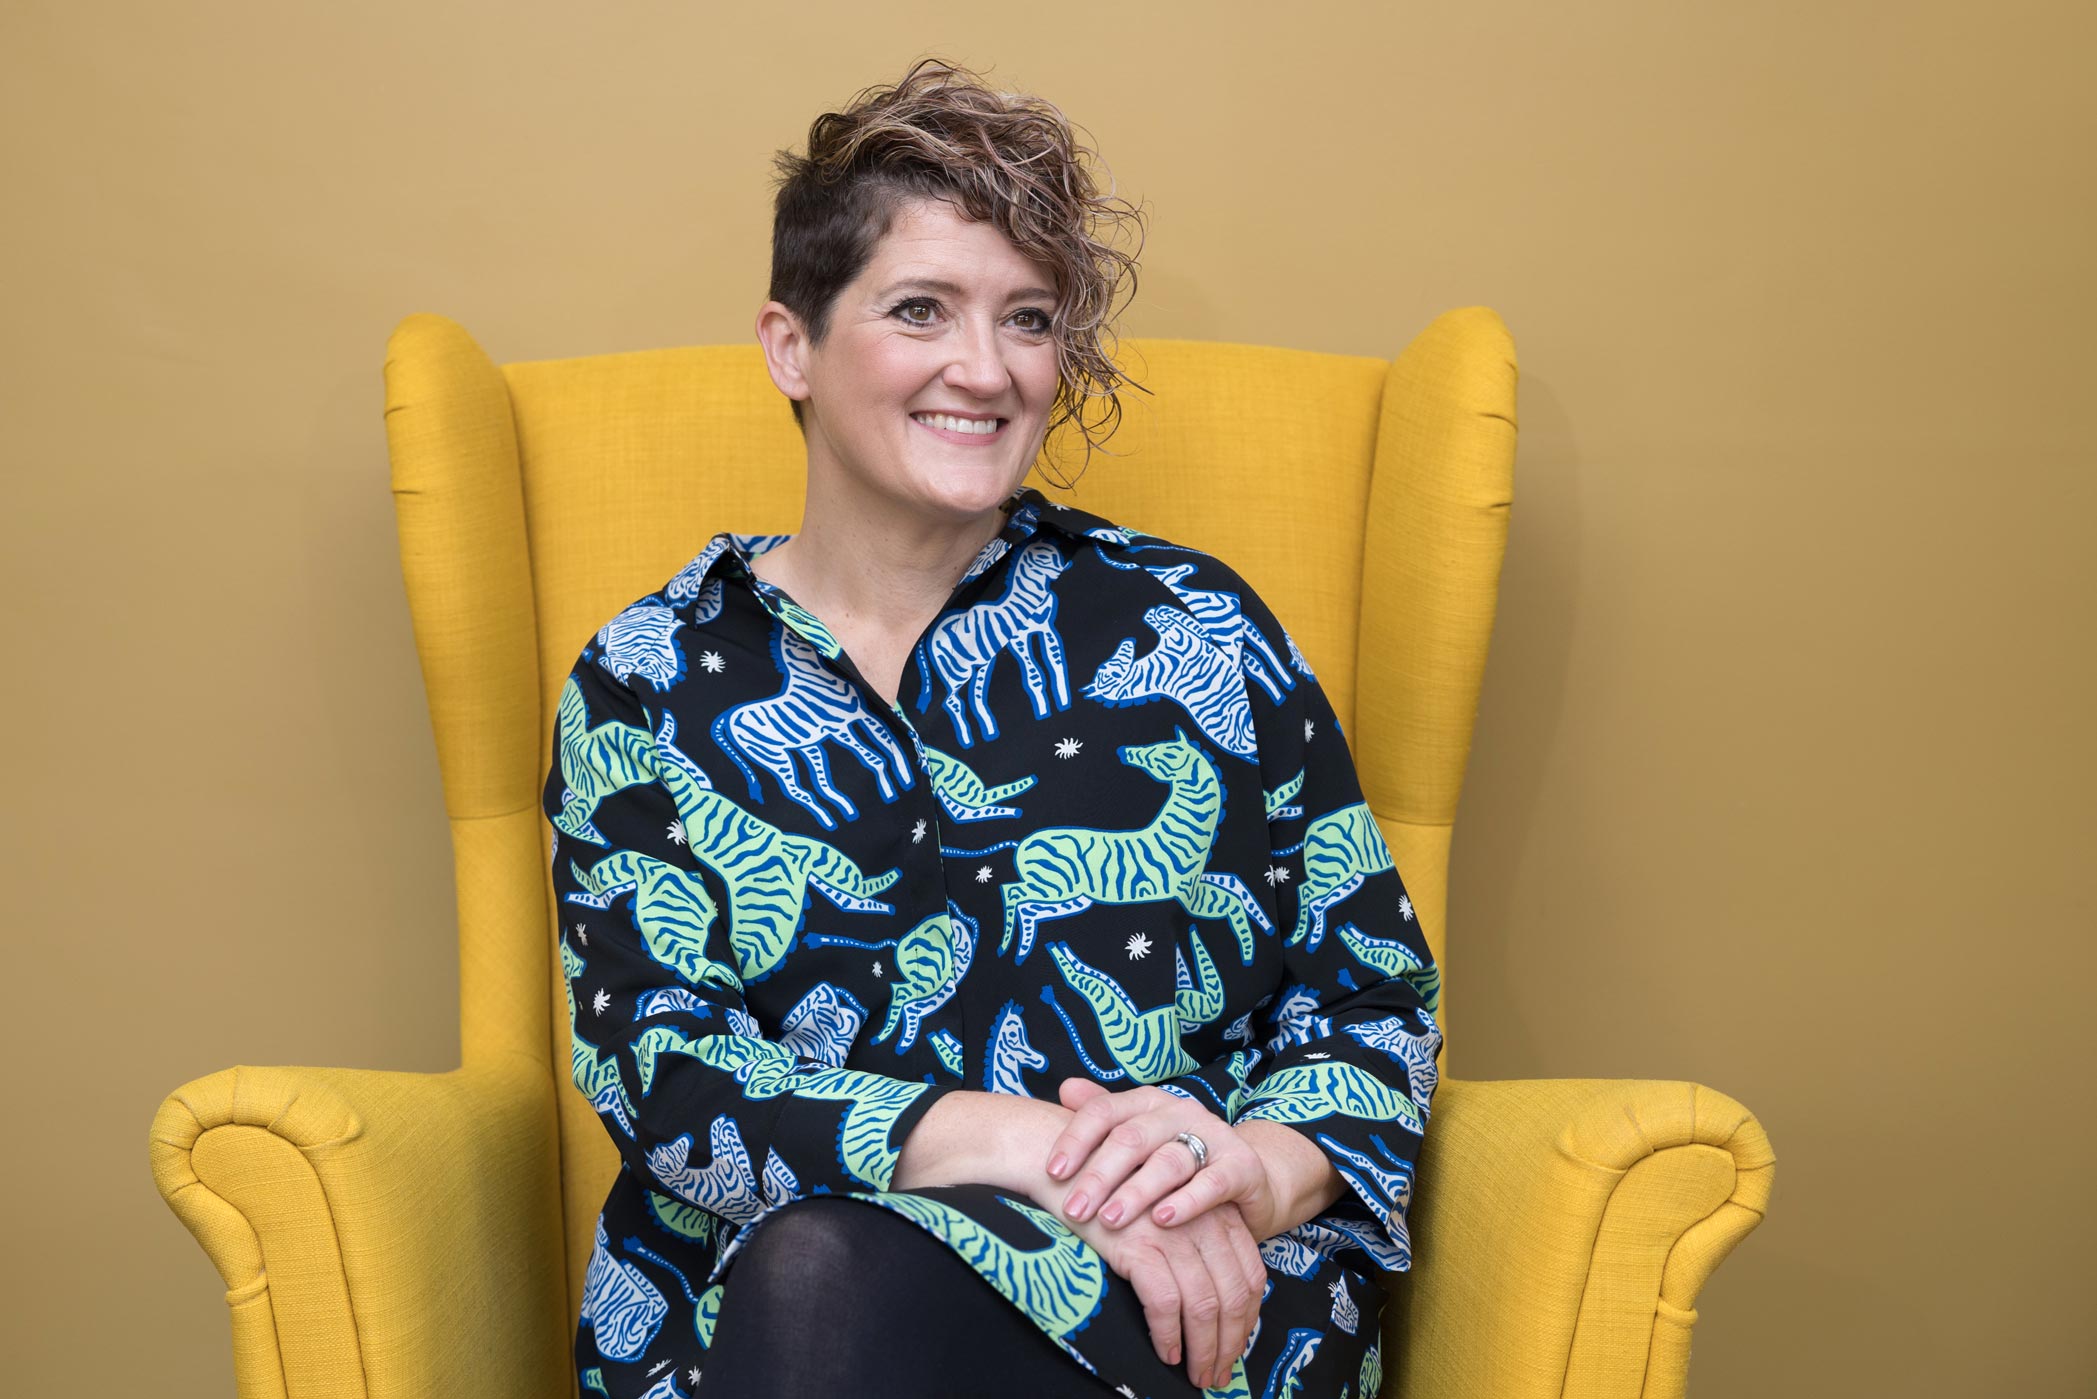 A smiling woman on a yellow chair in front of a yellow wall during her Croydon personal branding photography shoot